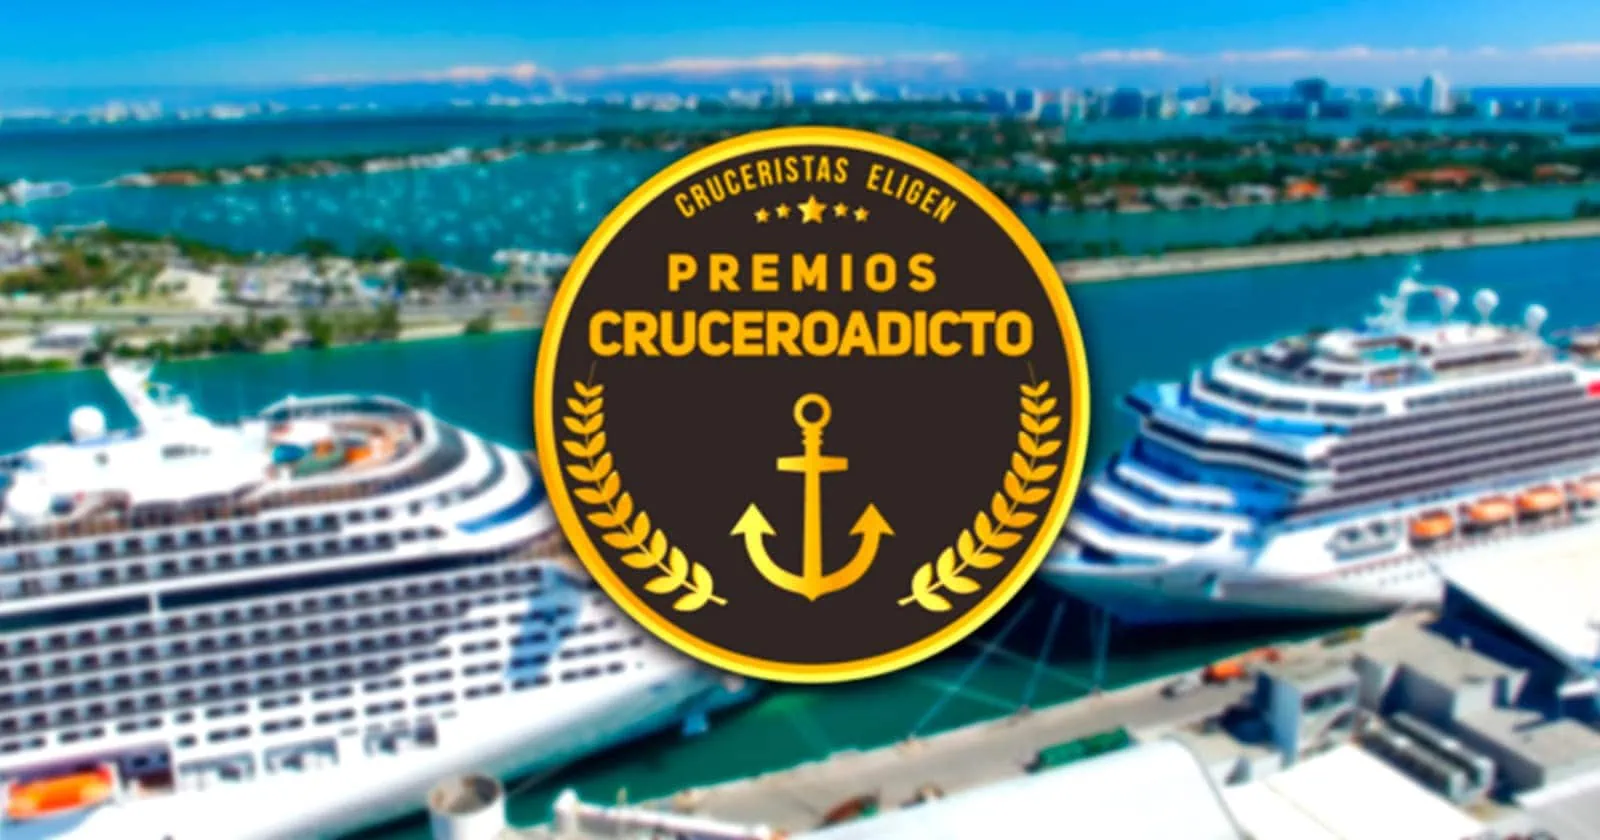 This Florida Port is the Best in North America in 2023 According to Cruceroadicto